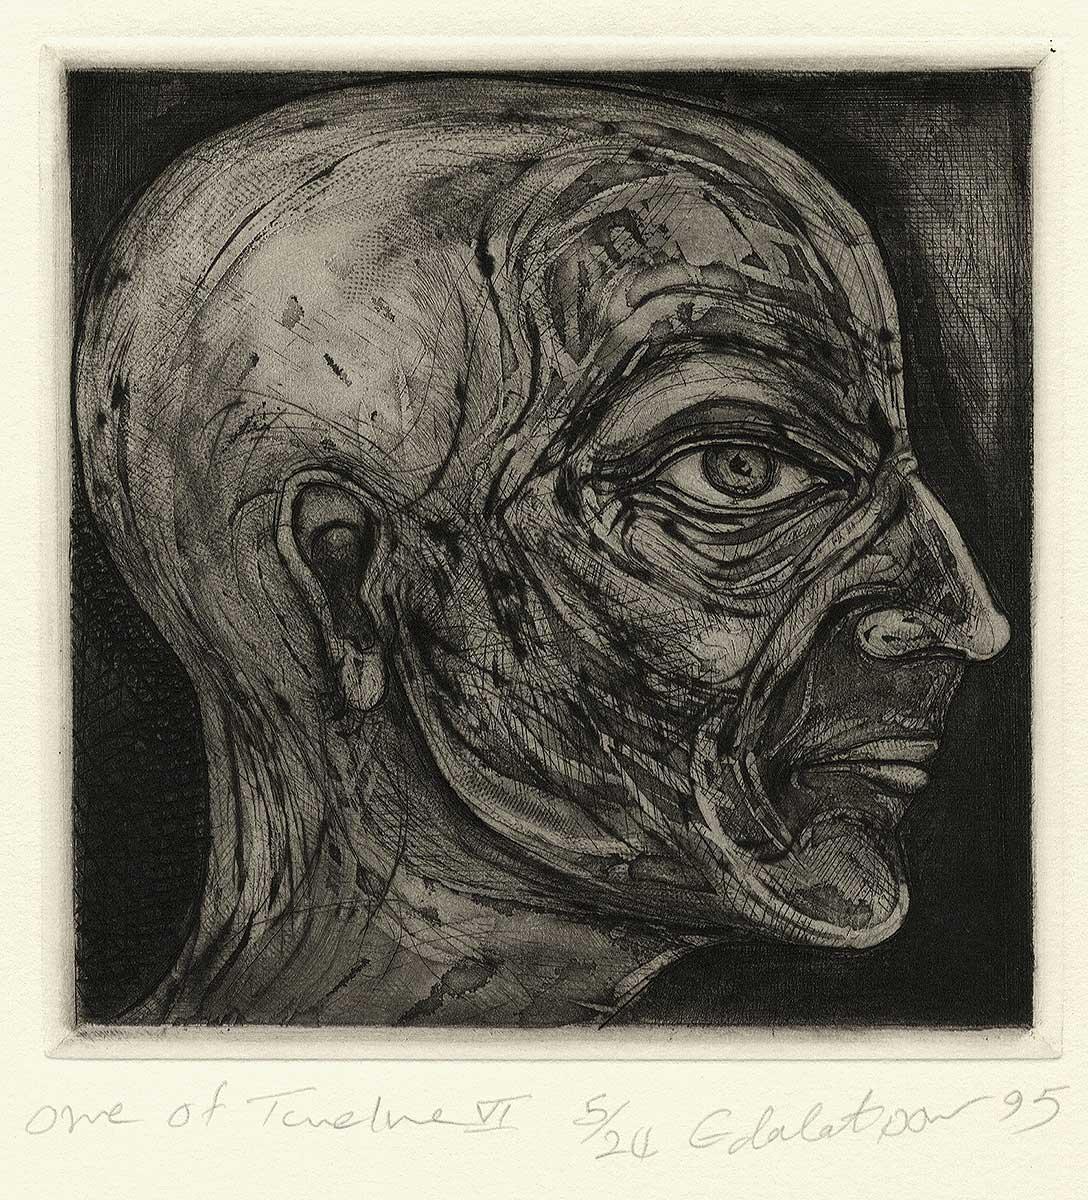 One of Twelve VI (etchings of one of 12 heads based on  monumental sculpture) - Black Portrait Print by Seyed M. S. Edalatpour